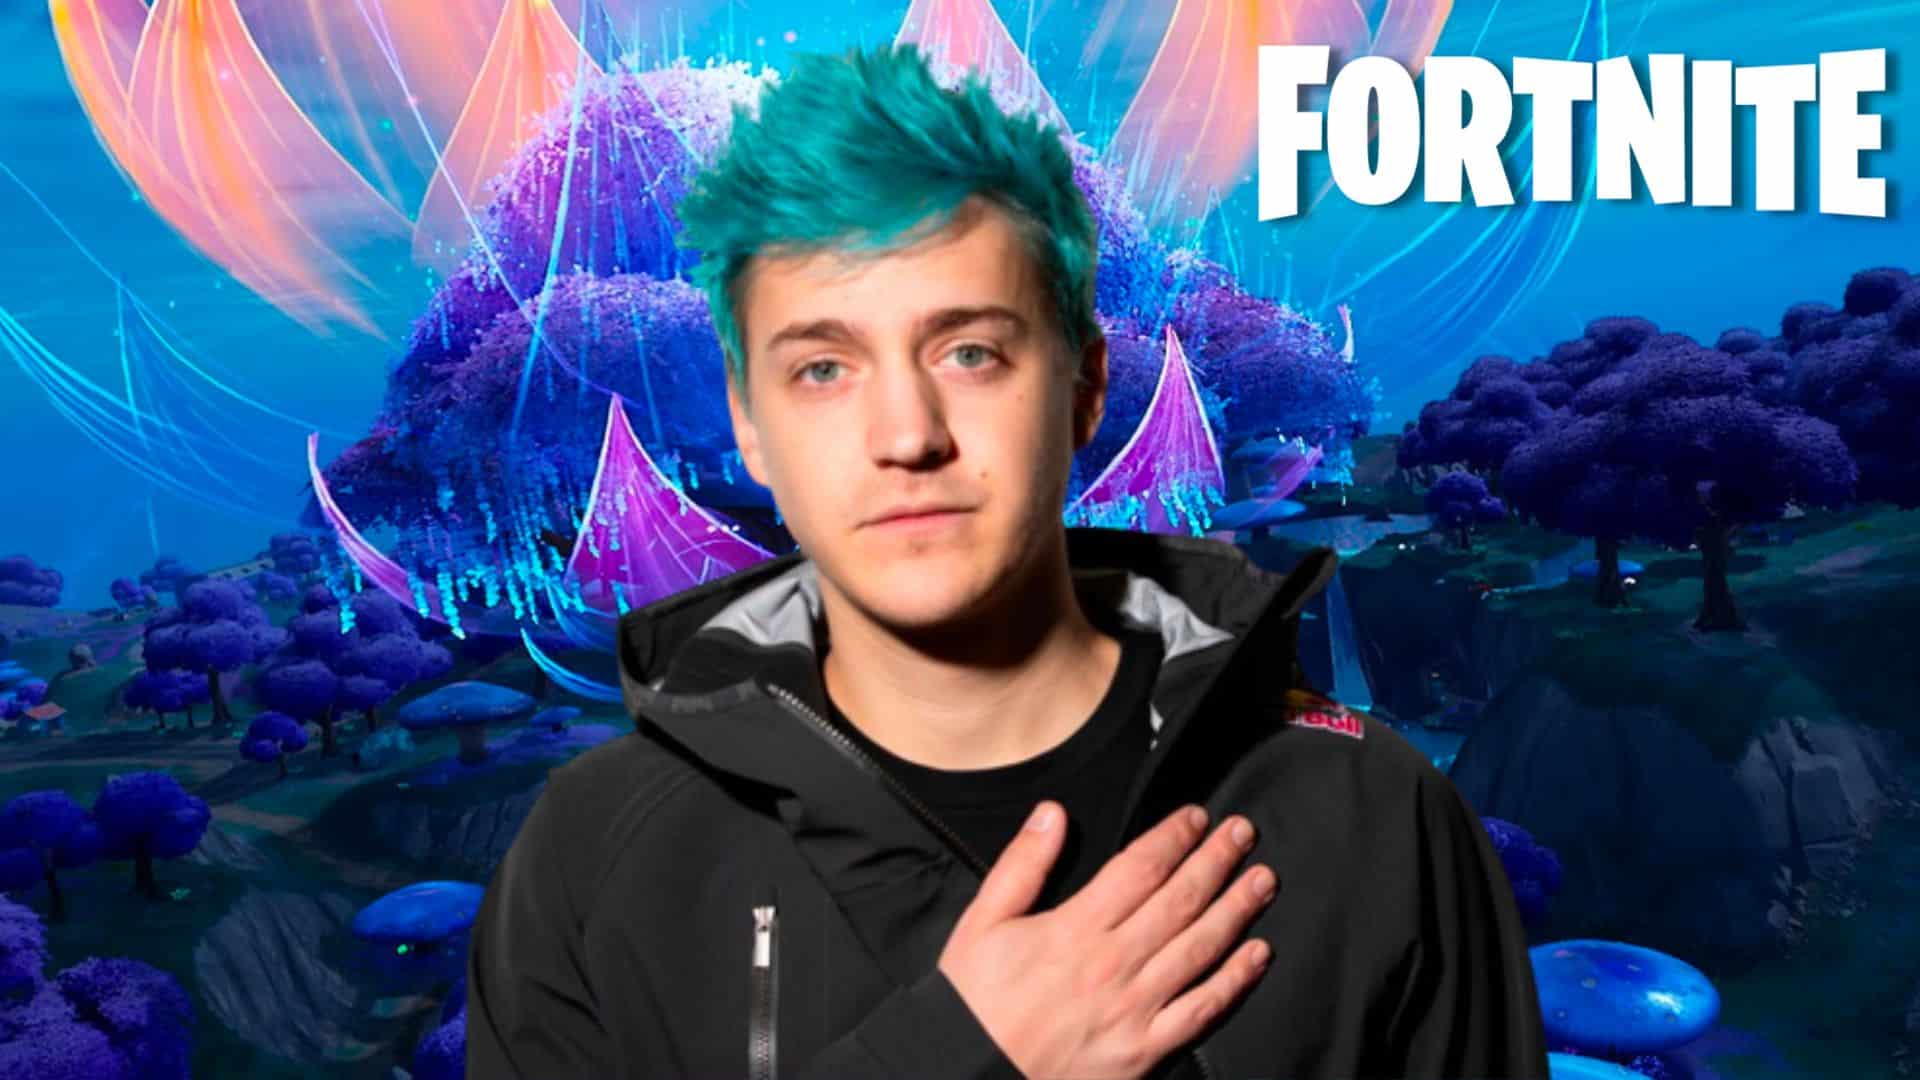 Twitch streamer 'Ninja,' one of the biggest names in Fortnite, is  abandoning the platform